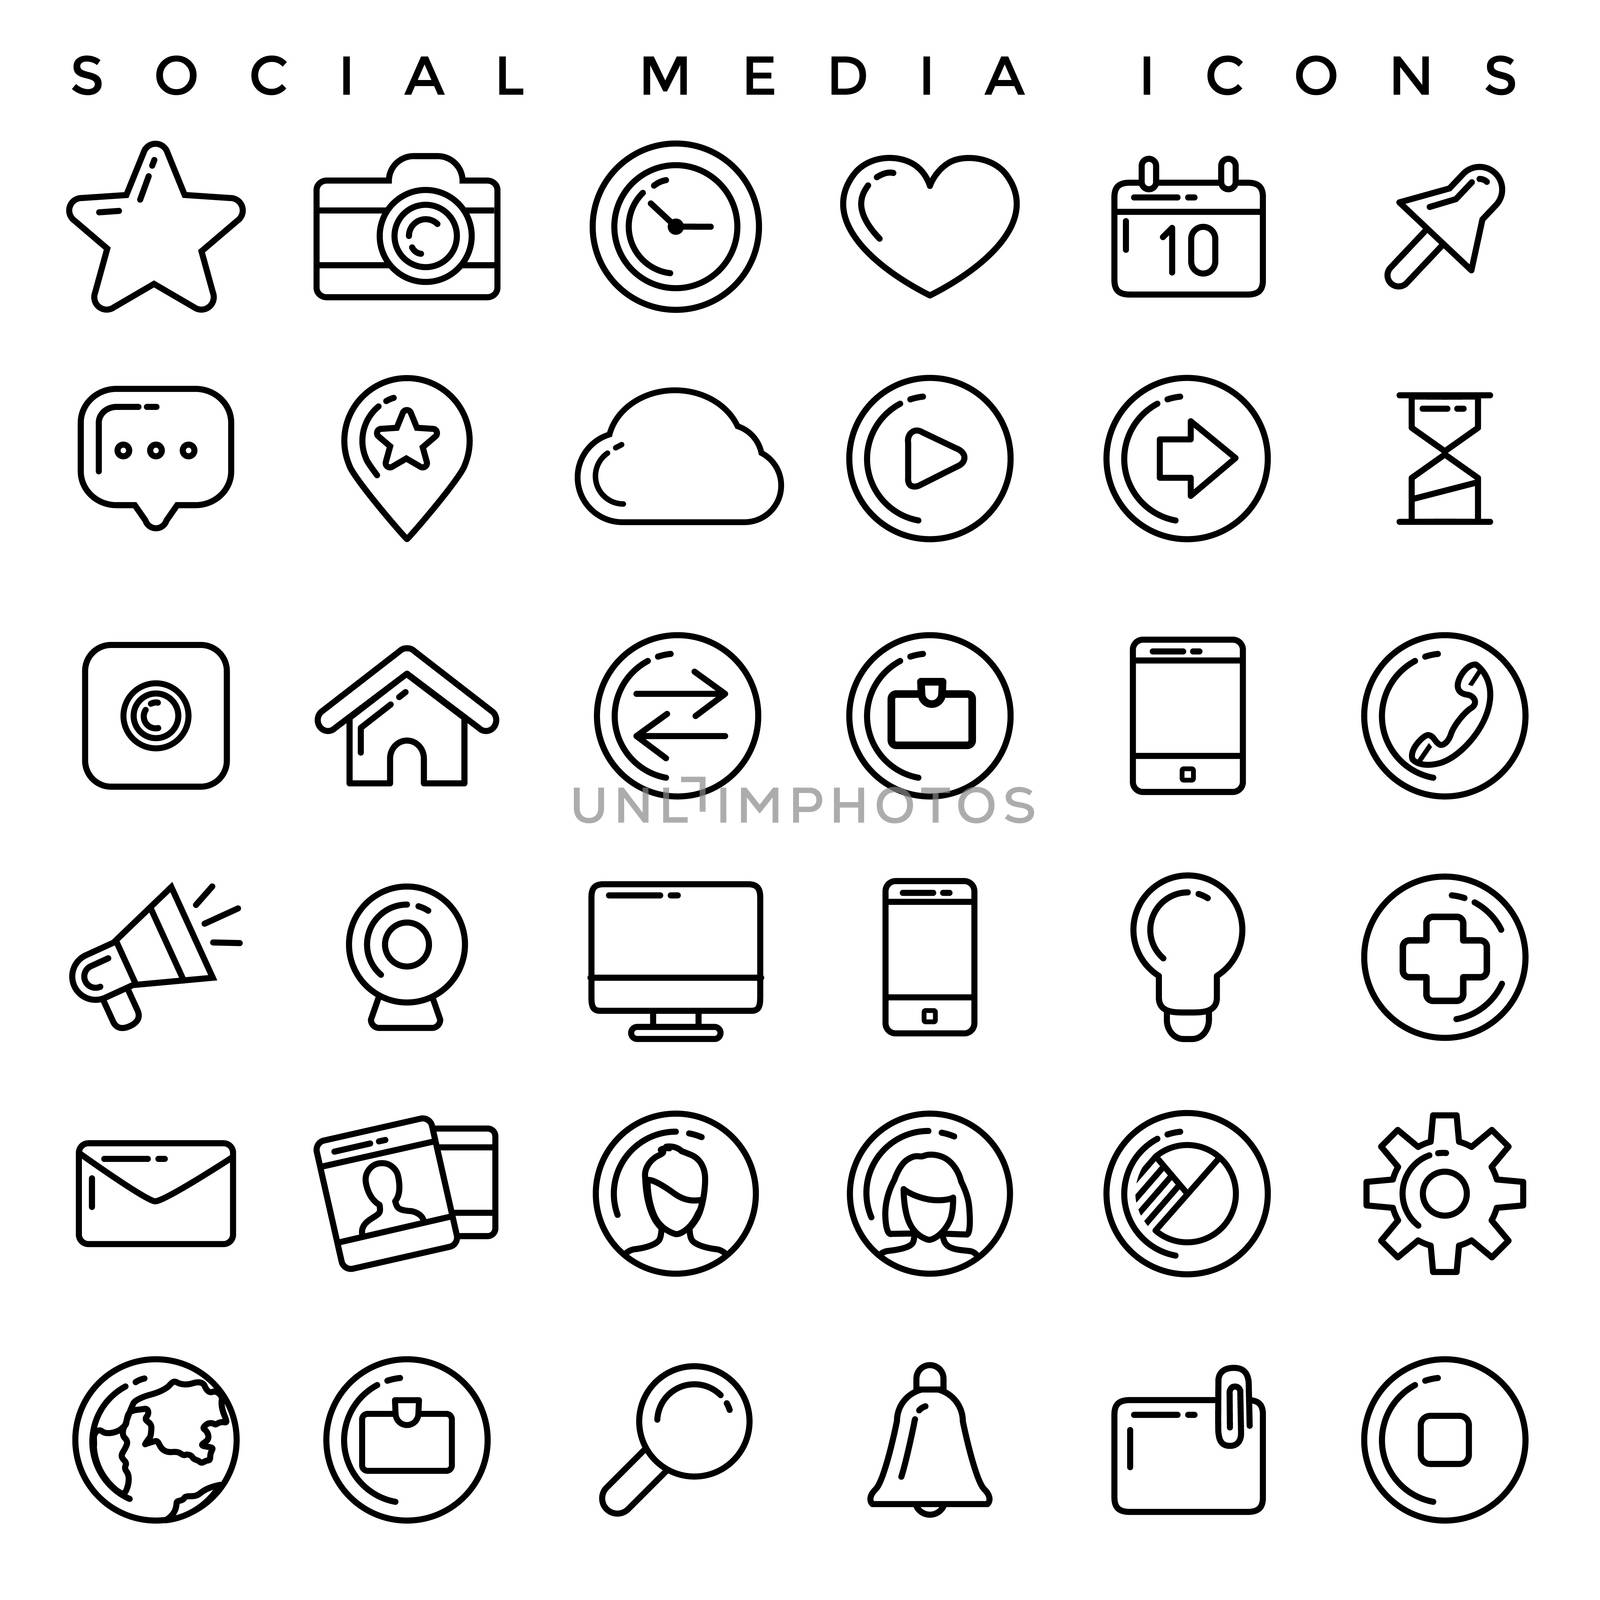 Social Media Icons Set by ConceptCafe